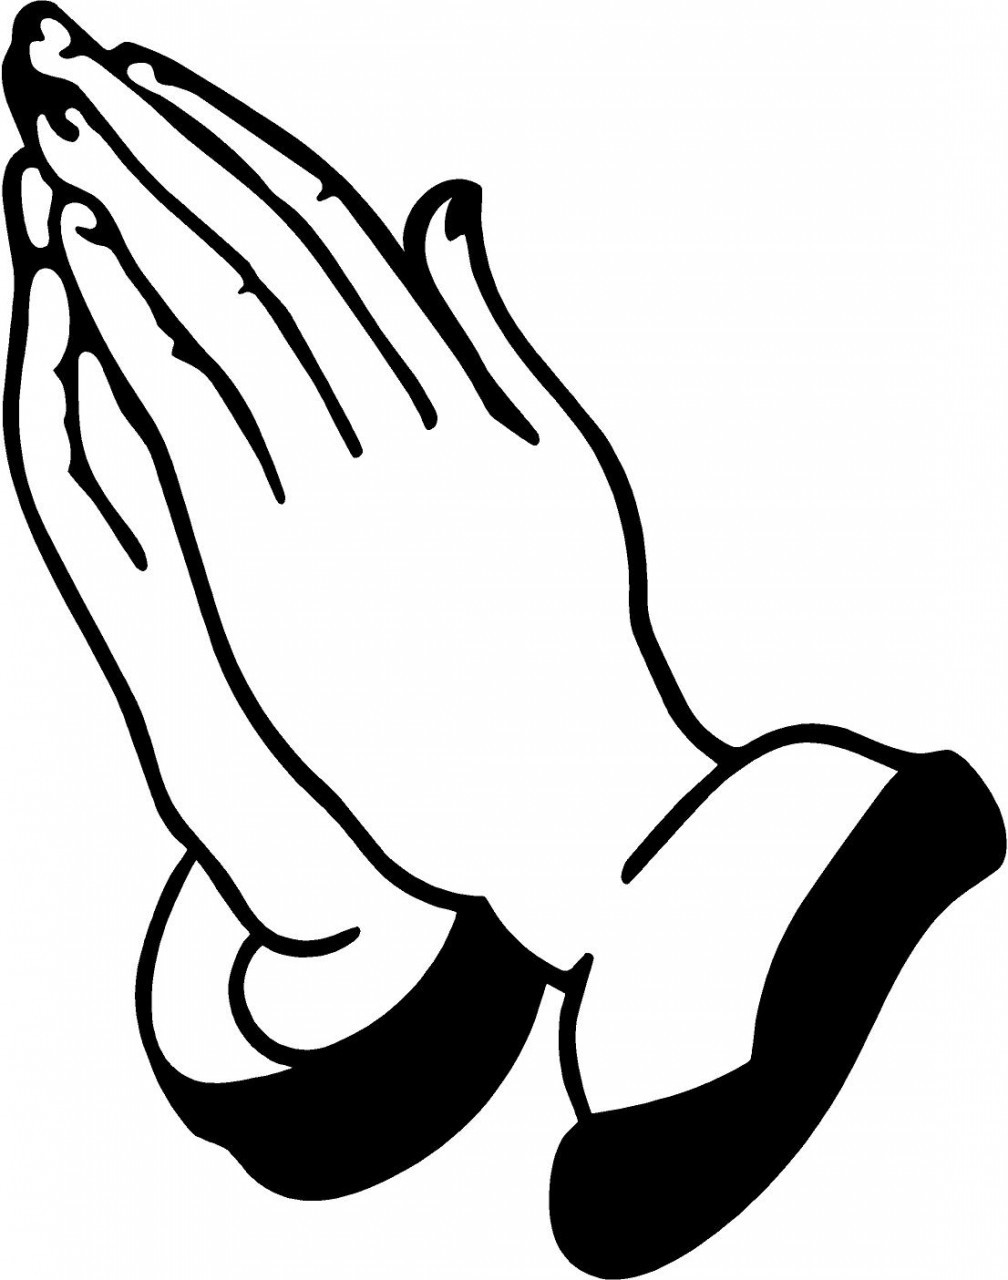 Outline of praying hands clipart